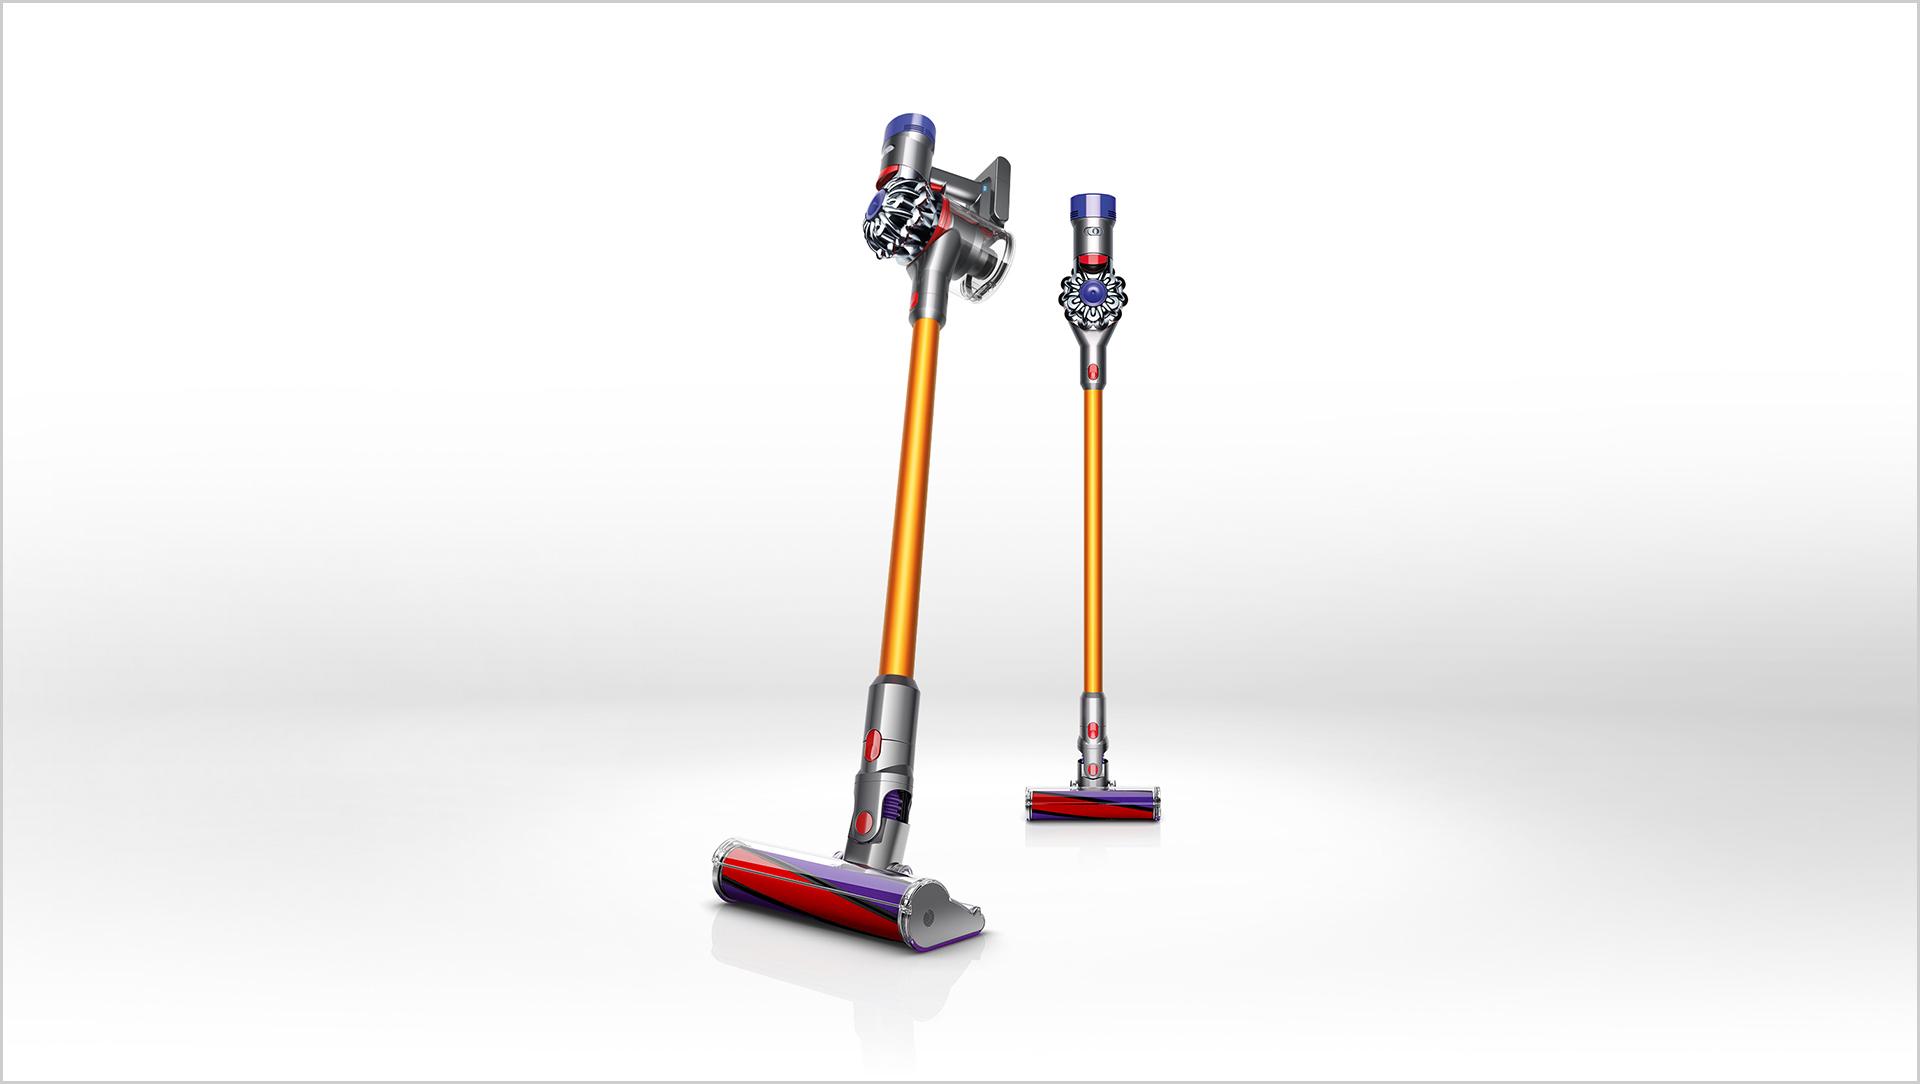 Dyson V8 being used on flooring